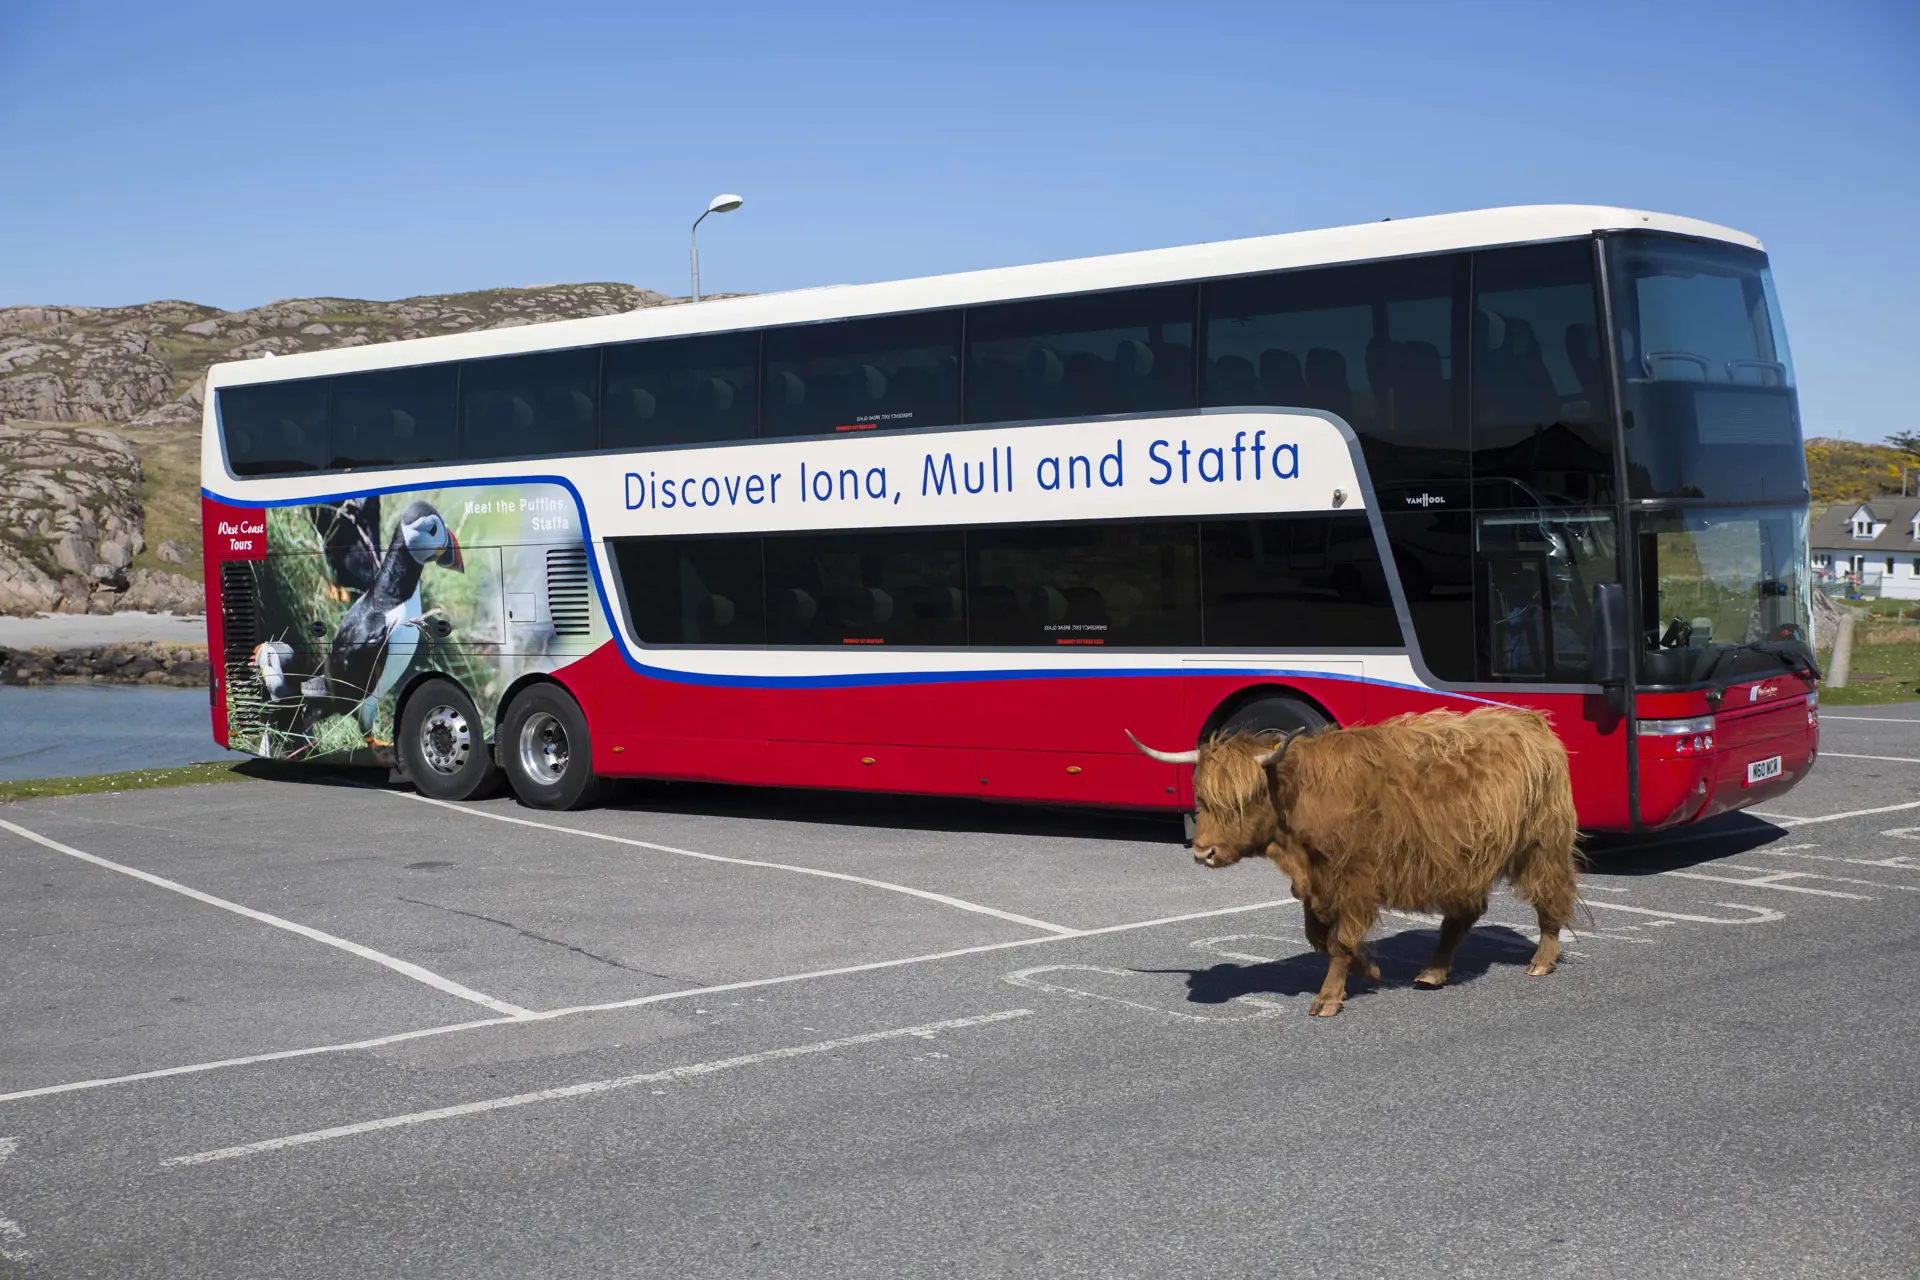 Mull Bus & Cow